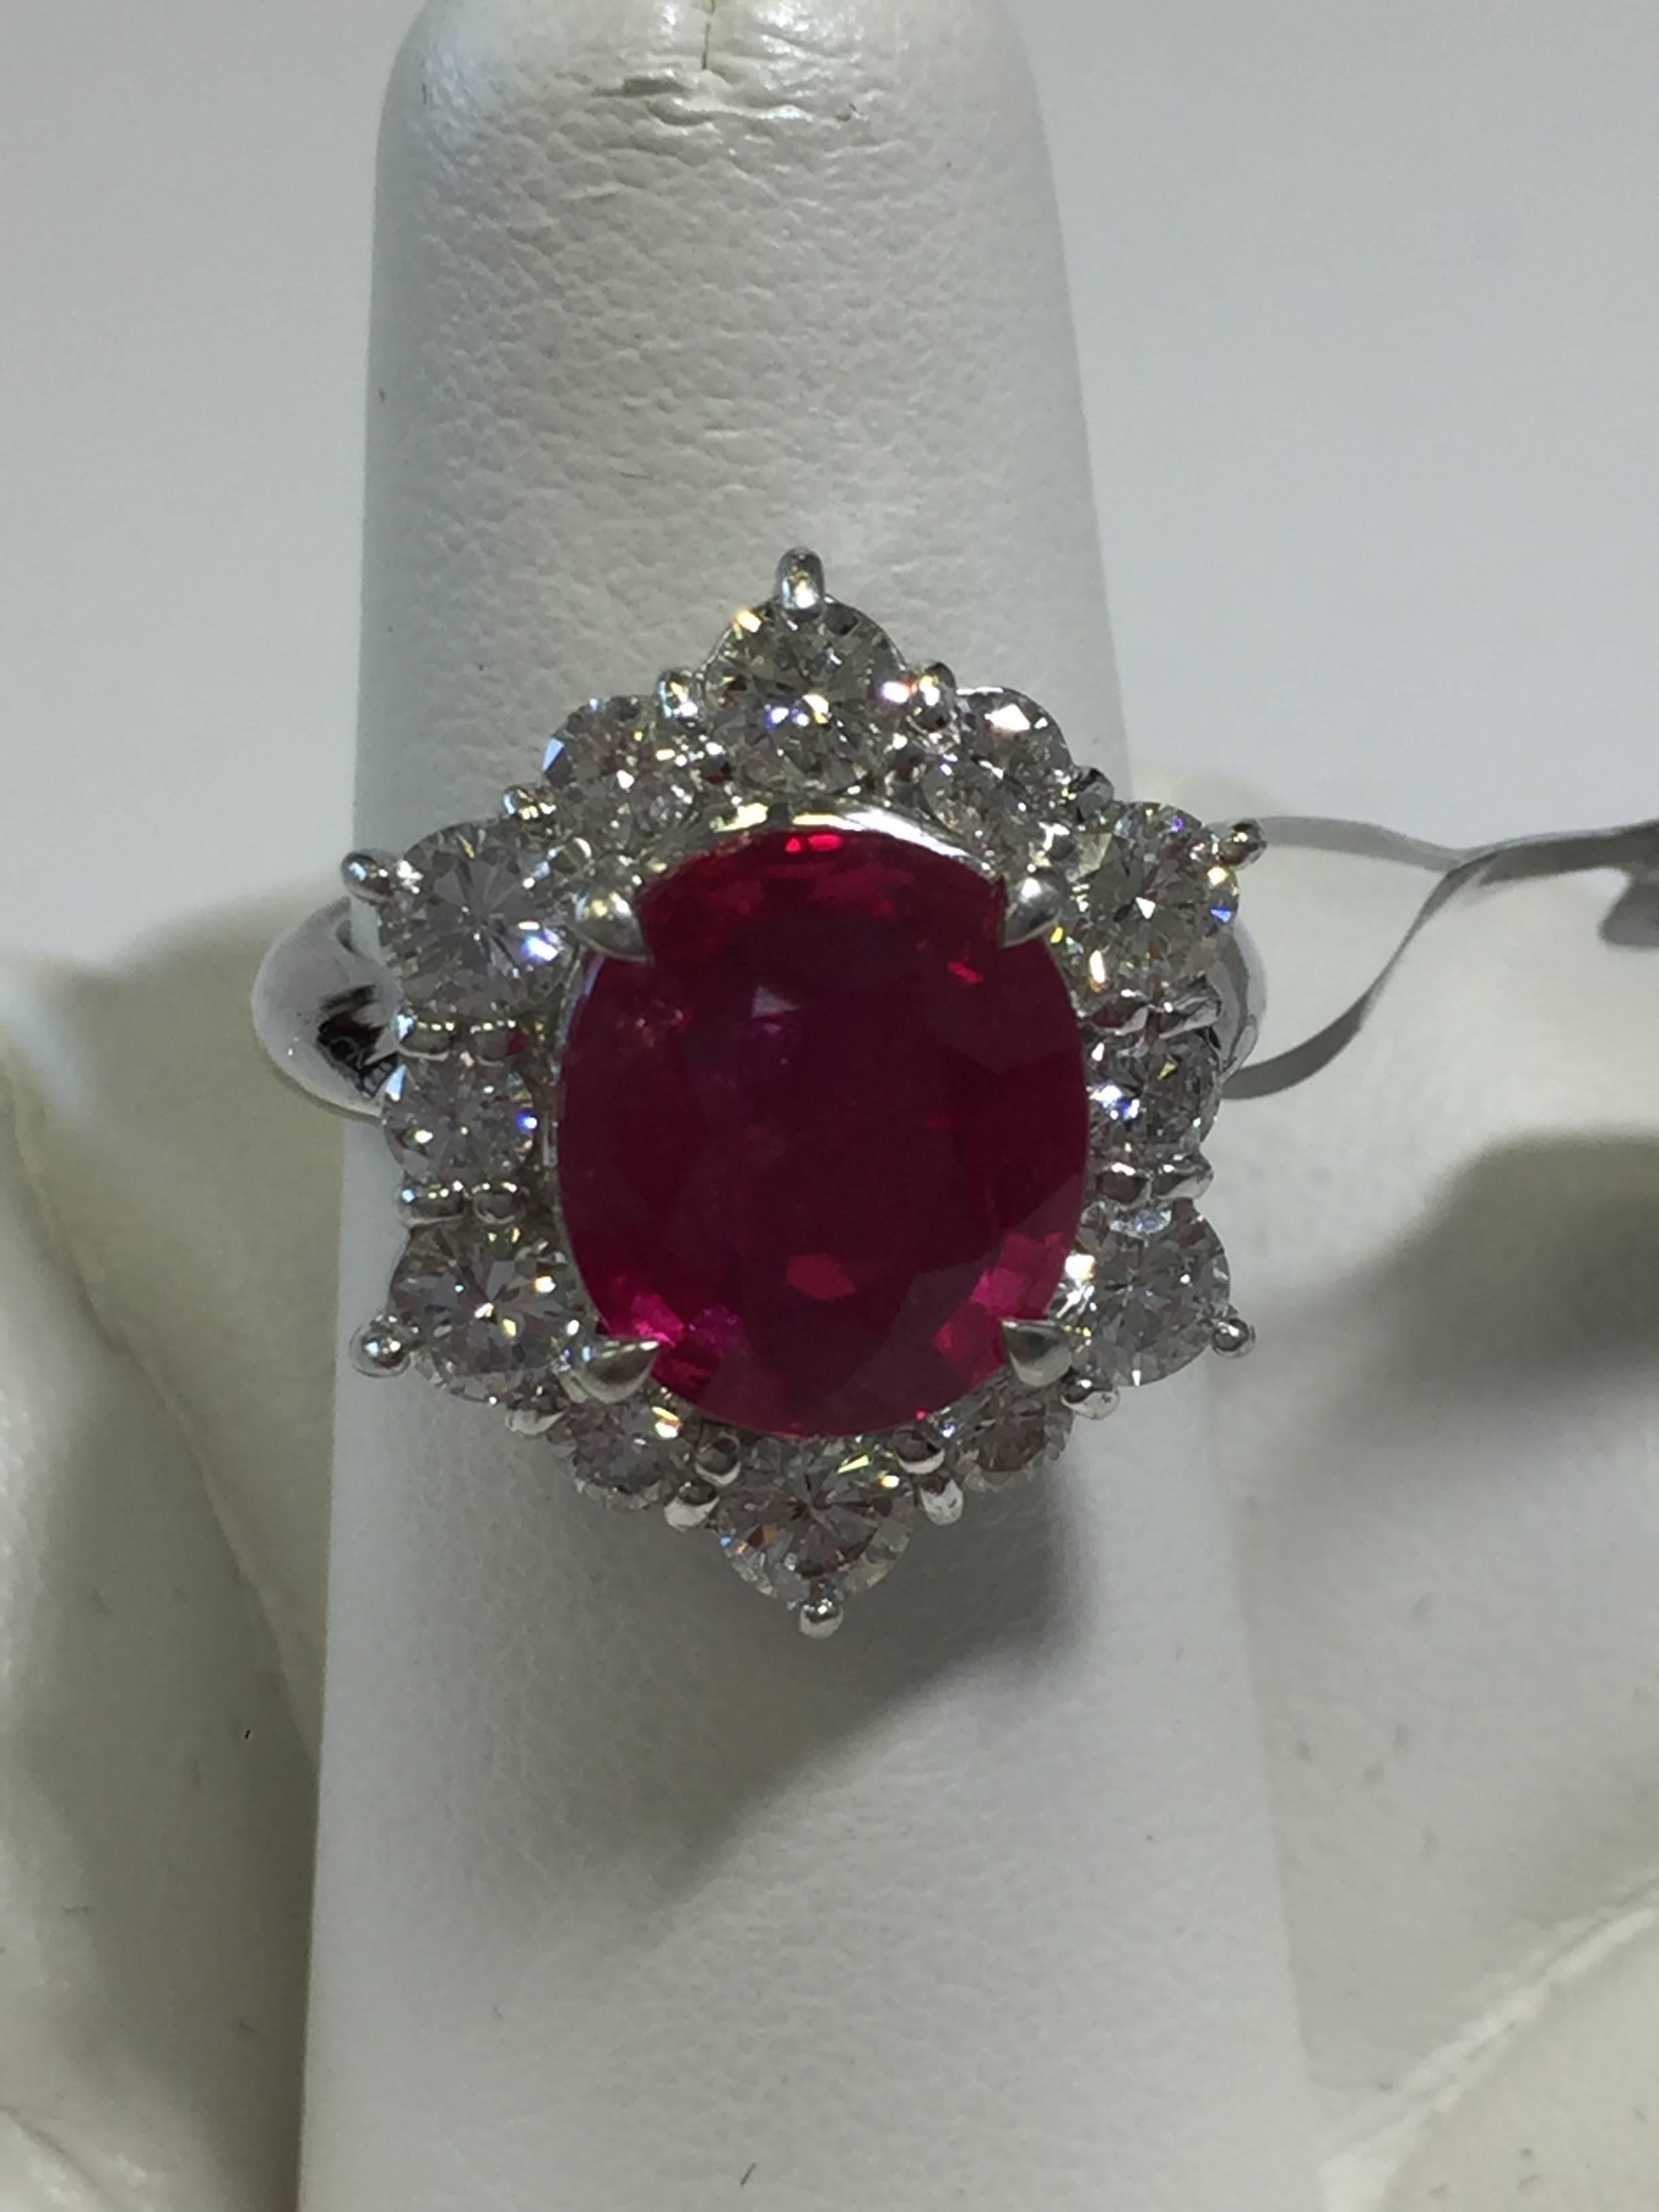 Breathtaking 5.01 carat red ruby oval with white diamond rounds in platinum.  A perfect addition to any collection and a great conversation piece! Size 5.75